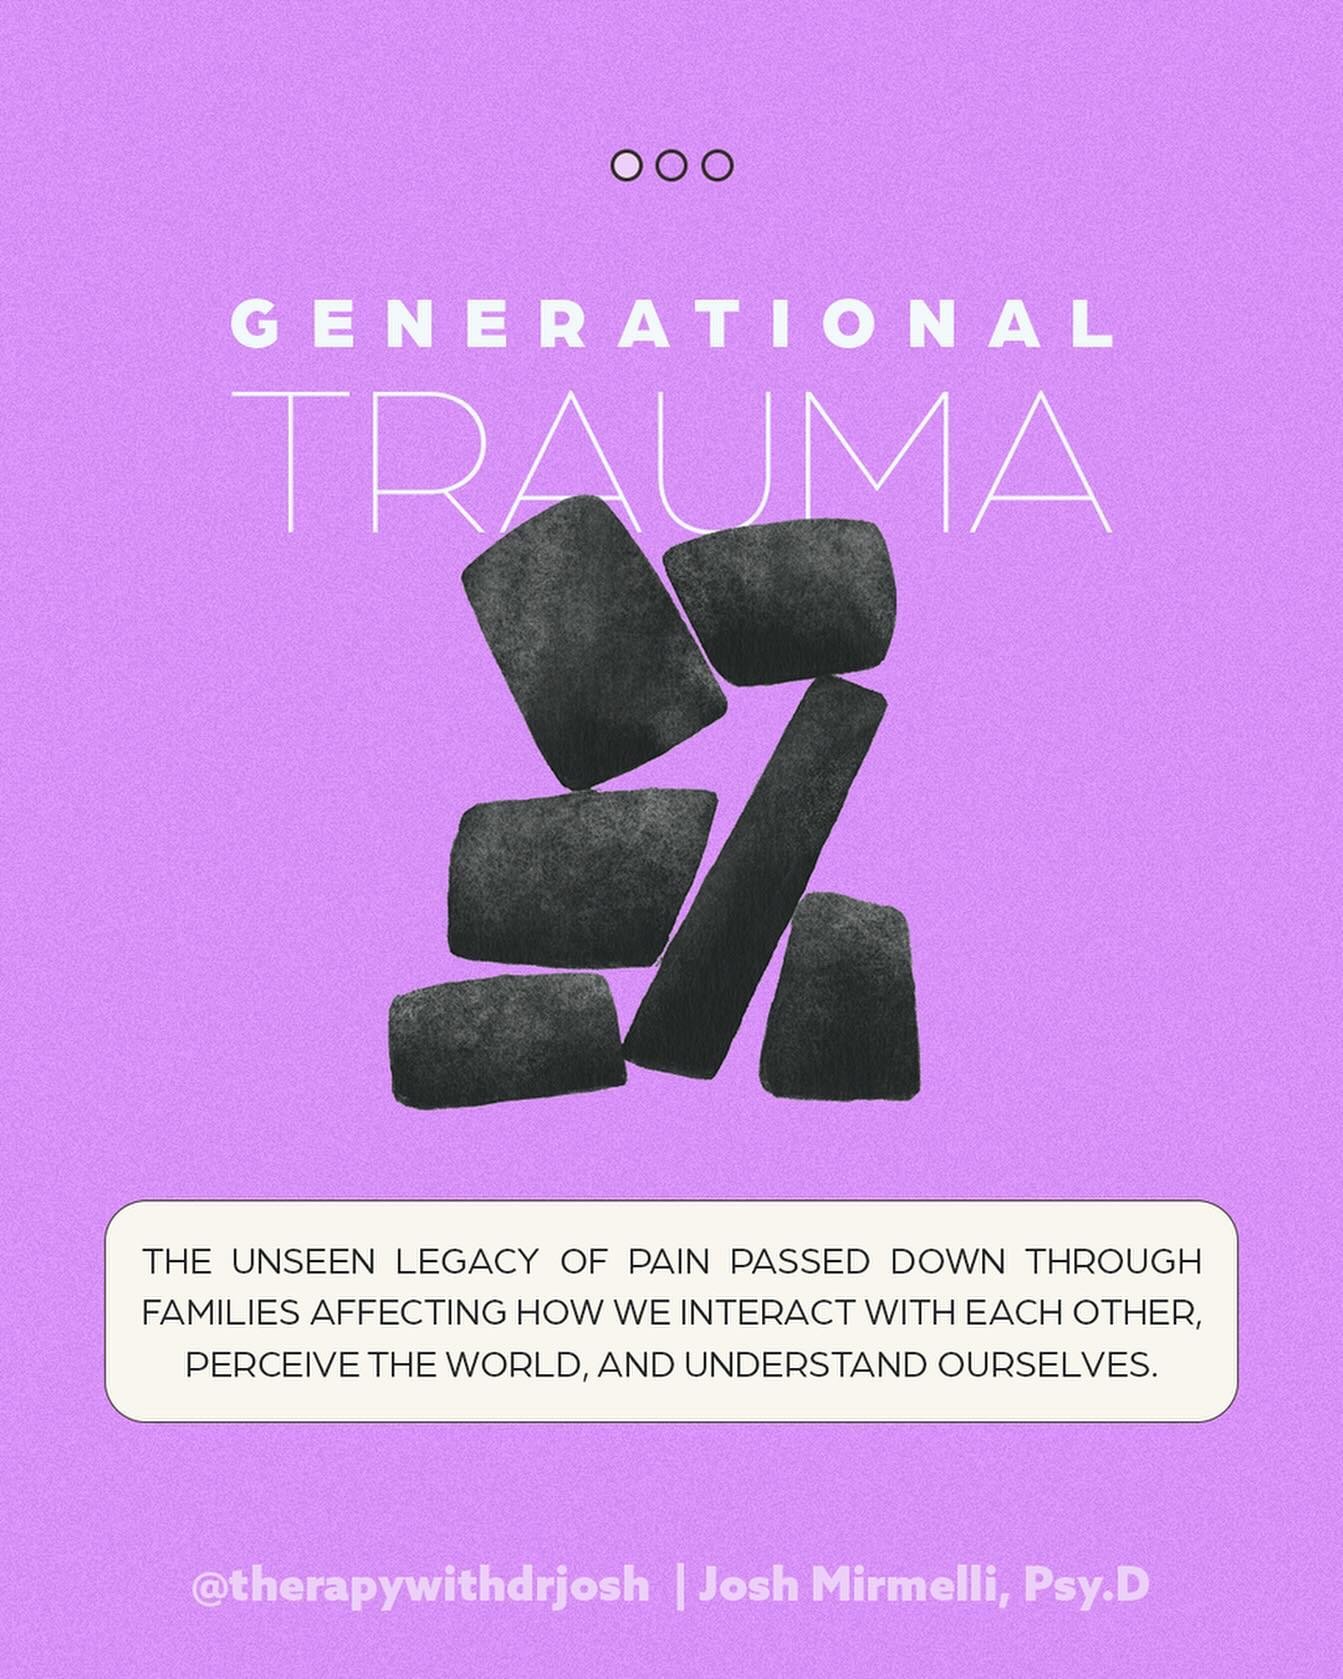 Intergenerational trauma may sound complex, but it touches on something deeply personal and universally human. It&rsquo;s the unseen legacy of pain passed down through families, affecting how we interact, perceive the world, and understand ourselves.